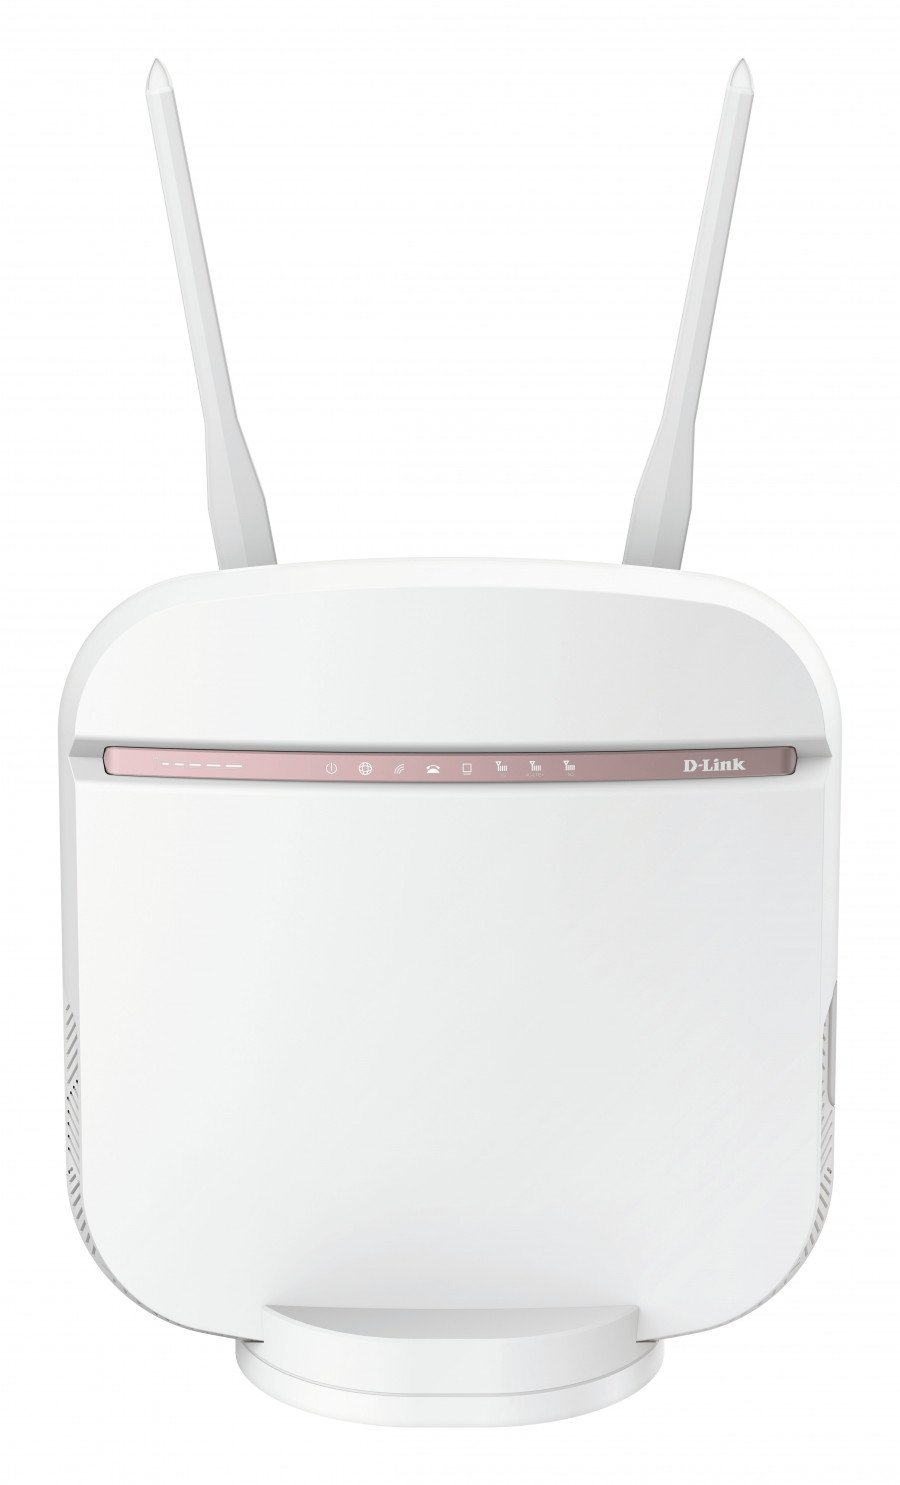 Image of D-link 5g lte wireless router Networking Informatica